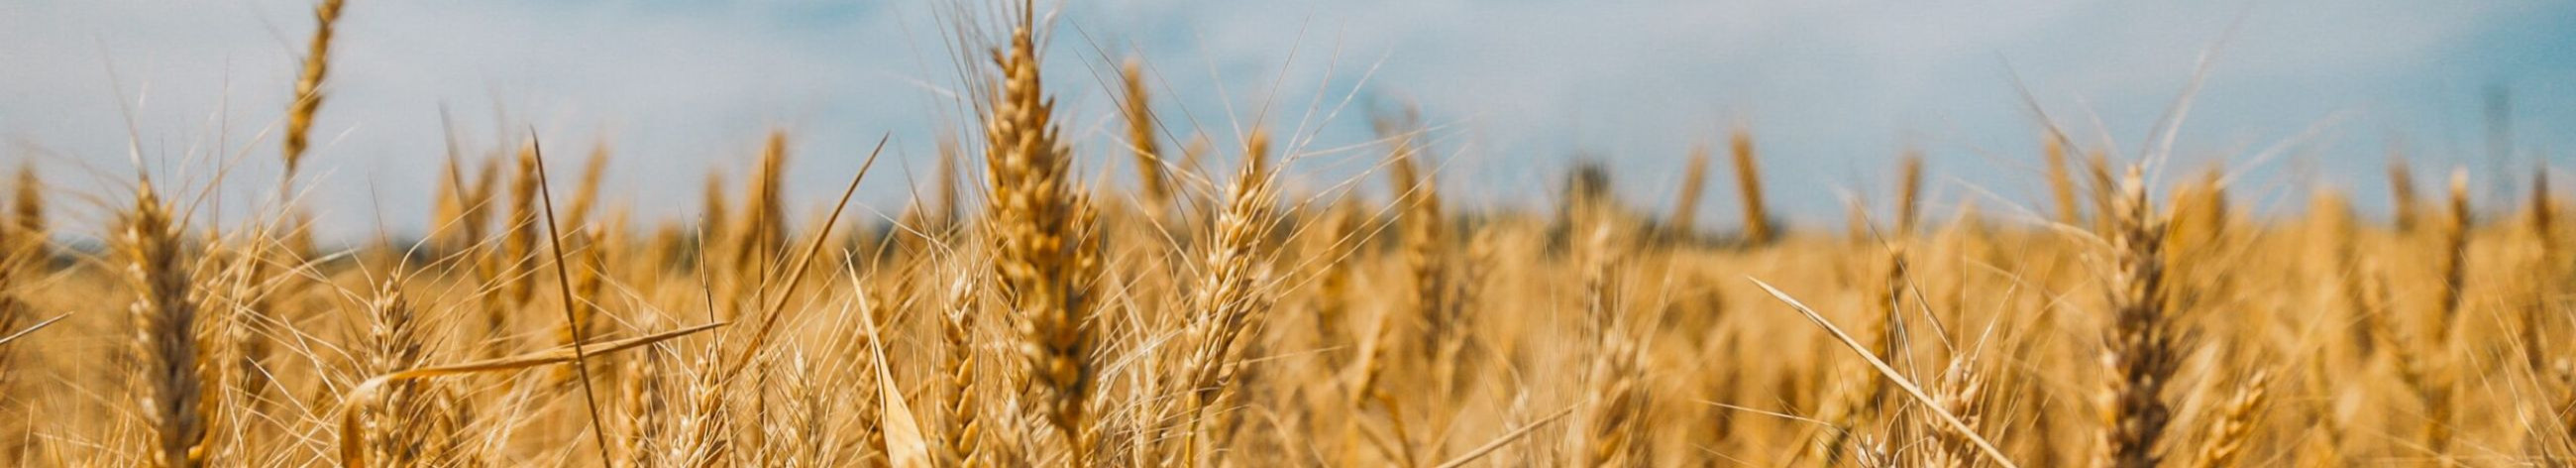 We provide comprehensive agricultural solutions including grain trading, feed components, and essential farming services.